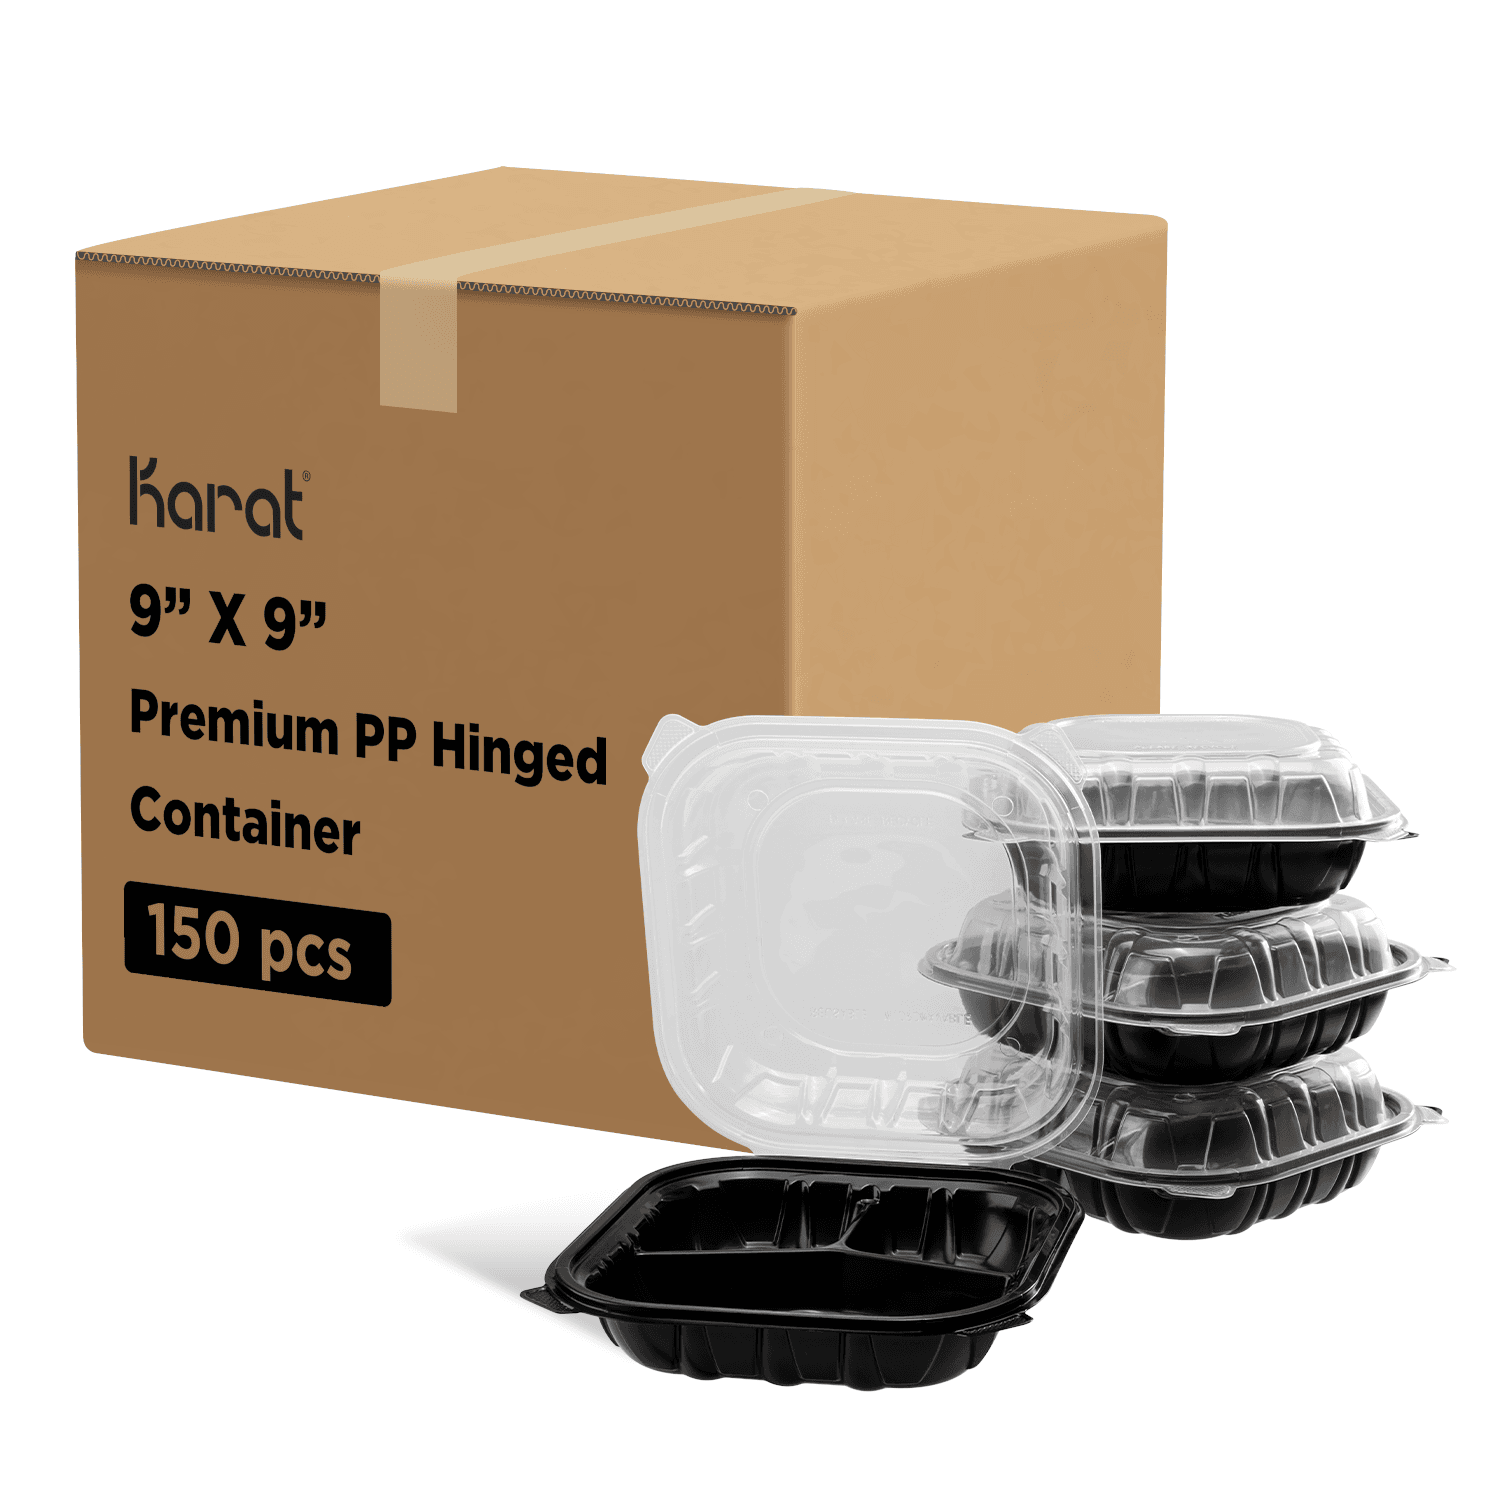 Karat 9"x 9" Premium PP Hinged Container with 3 Compartments next to packaging